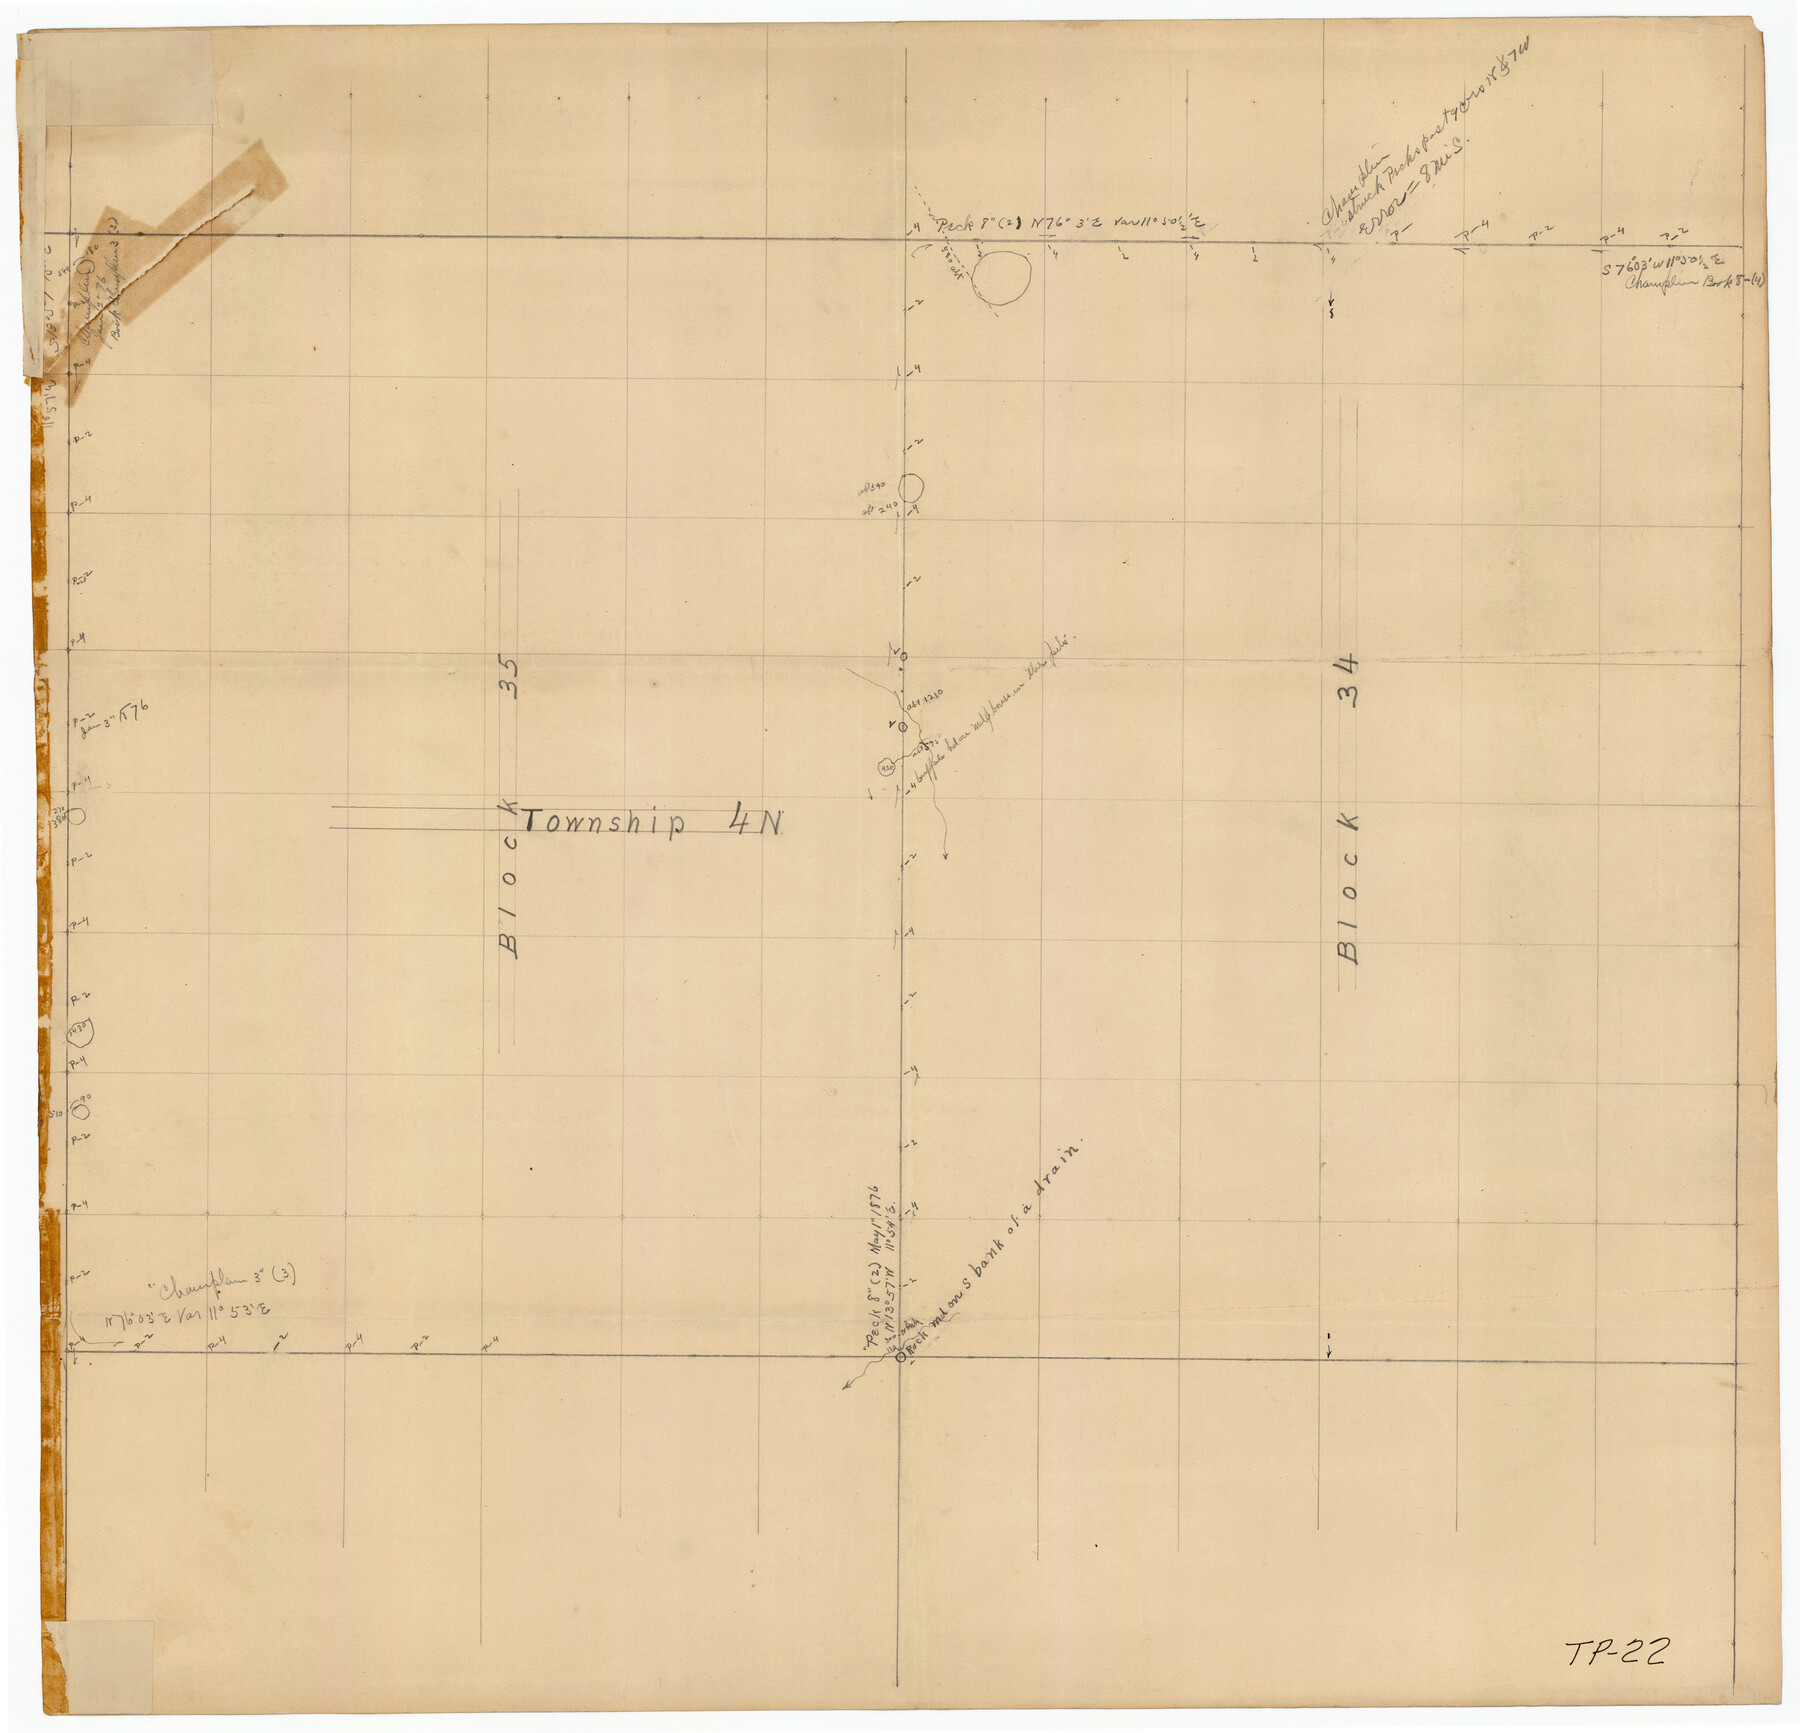 92030, [Blocks 34 and 35, Township 4N], Twichell Survey Records